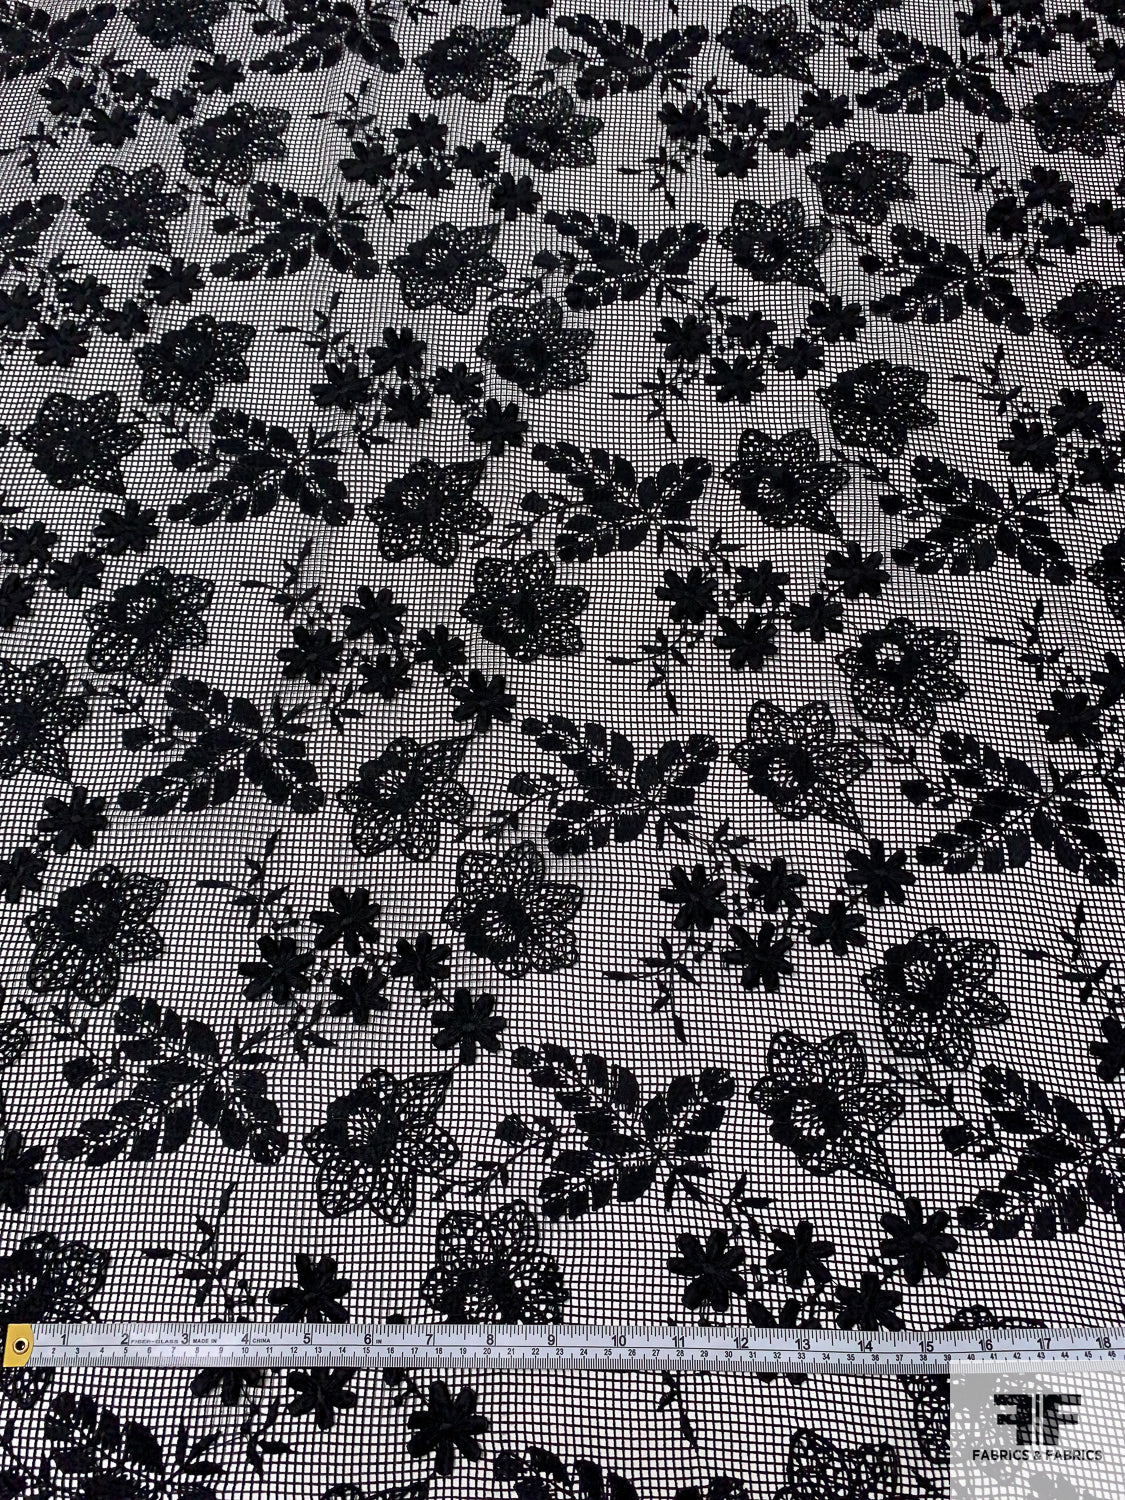 Black 3D Floral Embroidered Lace on a Black Netting - Lace - Other